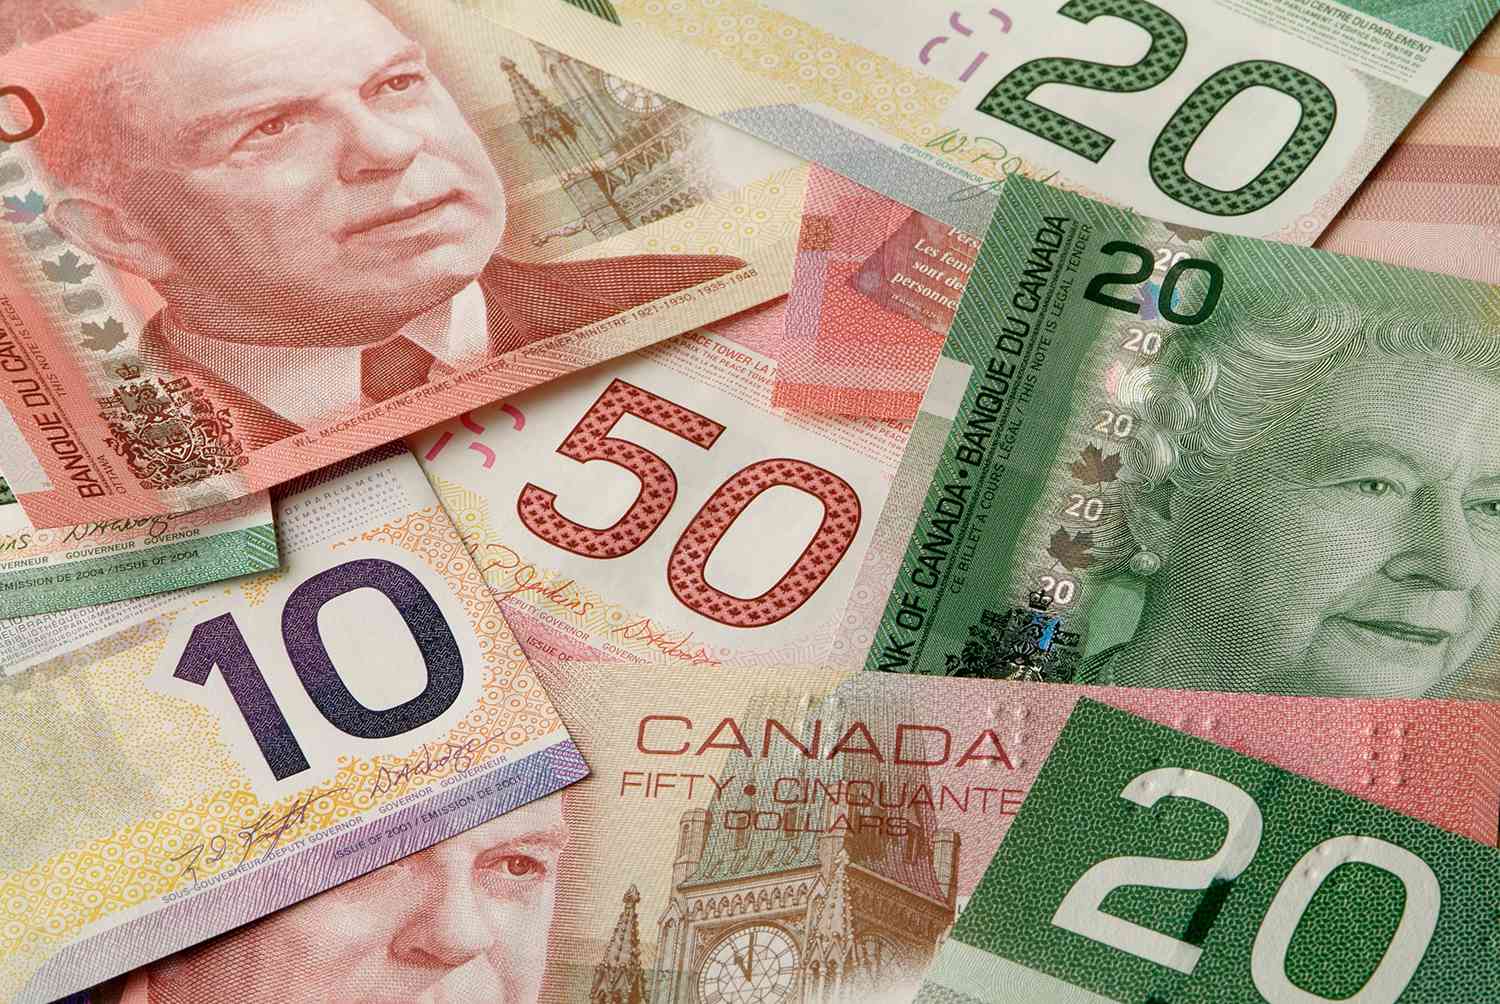 The Canadian Dollar Experienced a Decline on Tuesday as a Result of Risk-off Buying into the Greenback